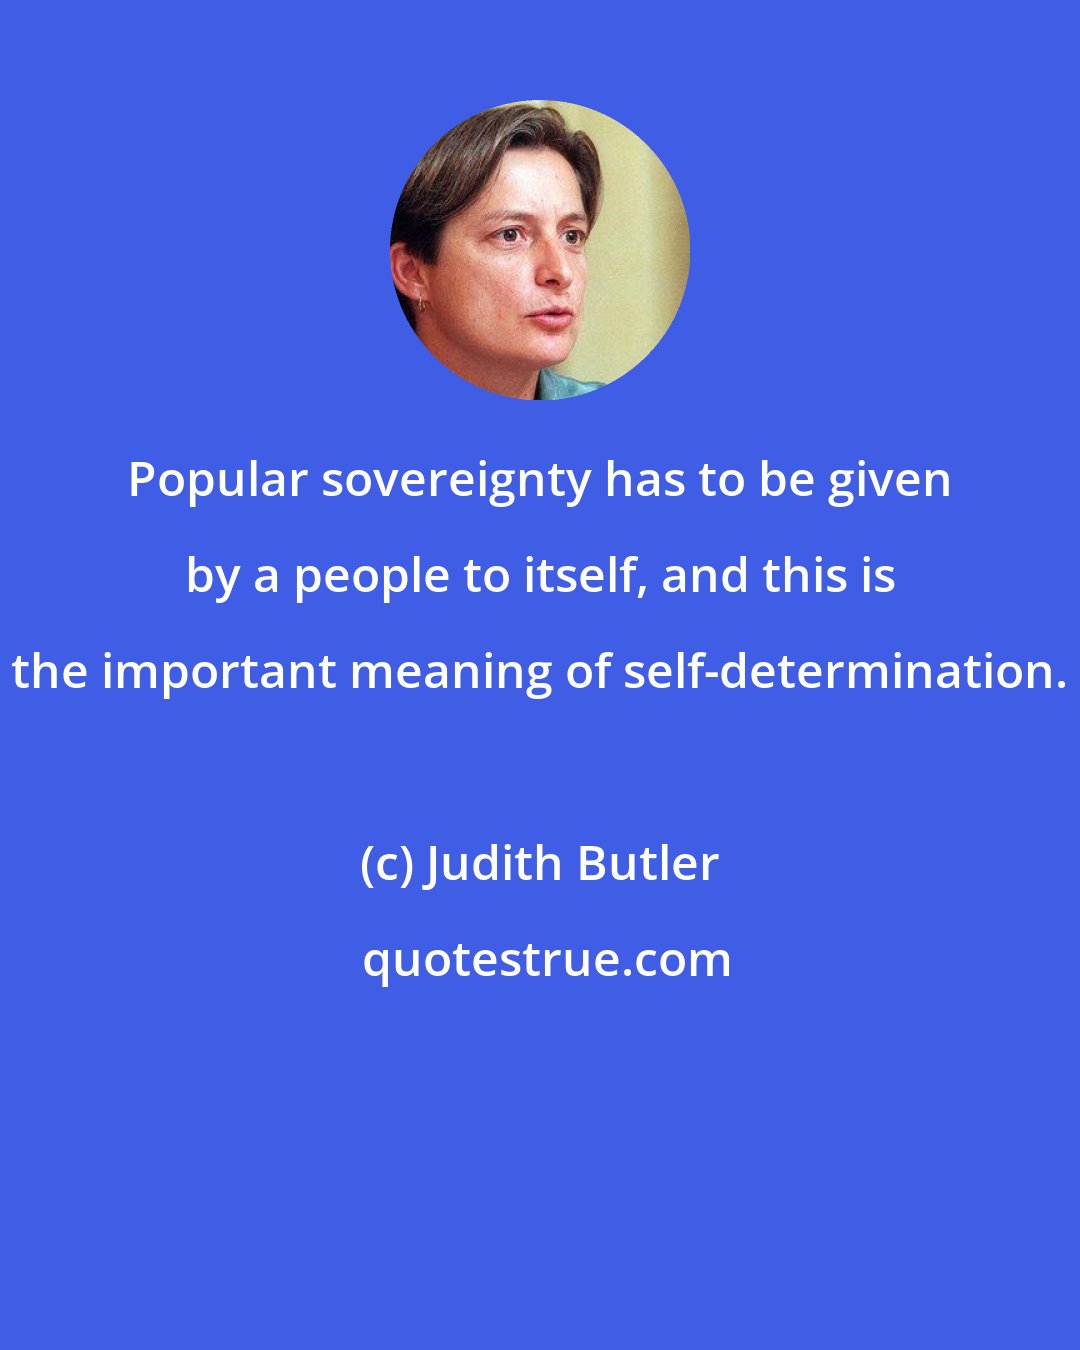 Judith Butler: Popular sovereignty has to be given by a people to itself, and this is the important meaning of self-determination.